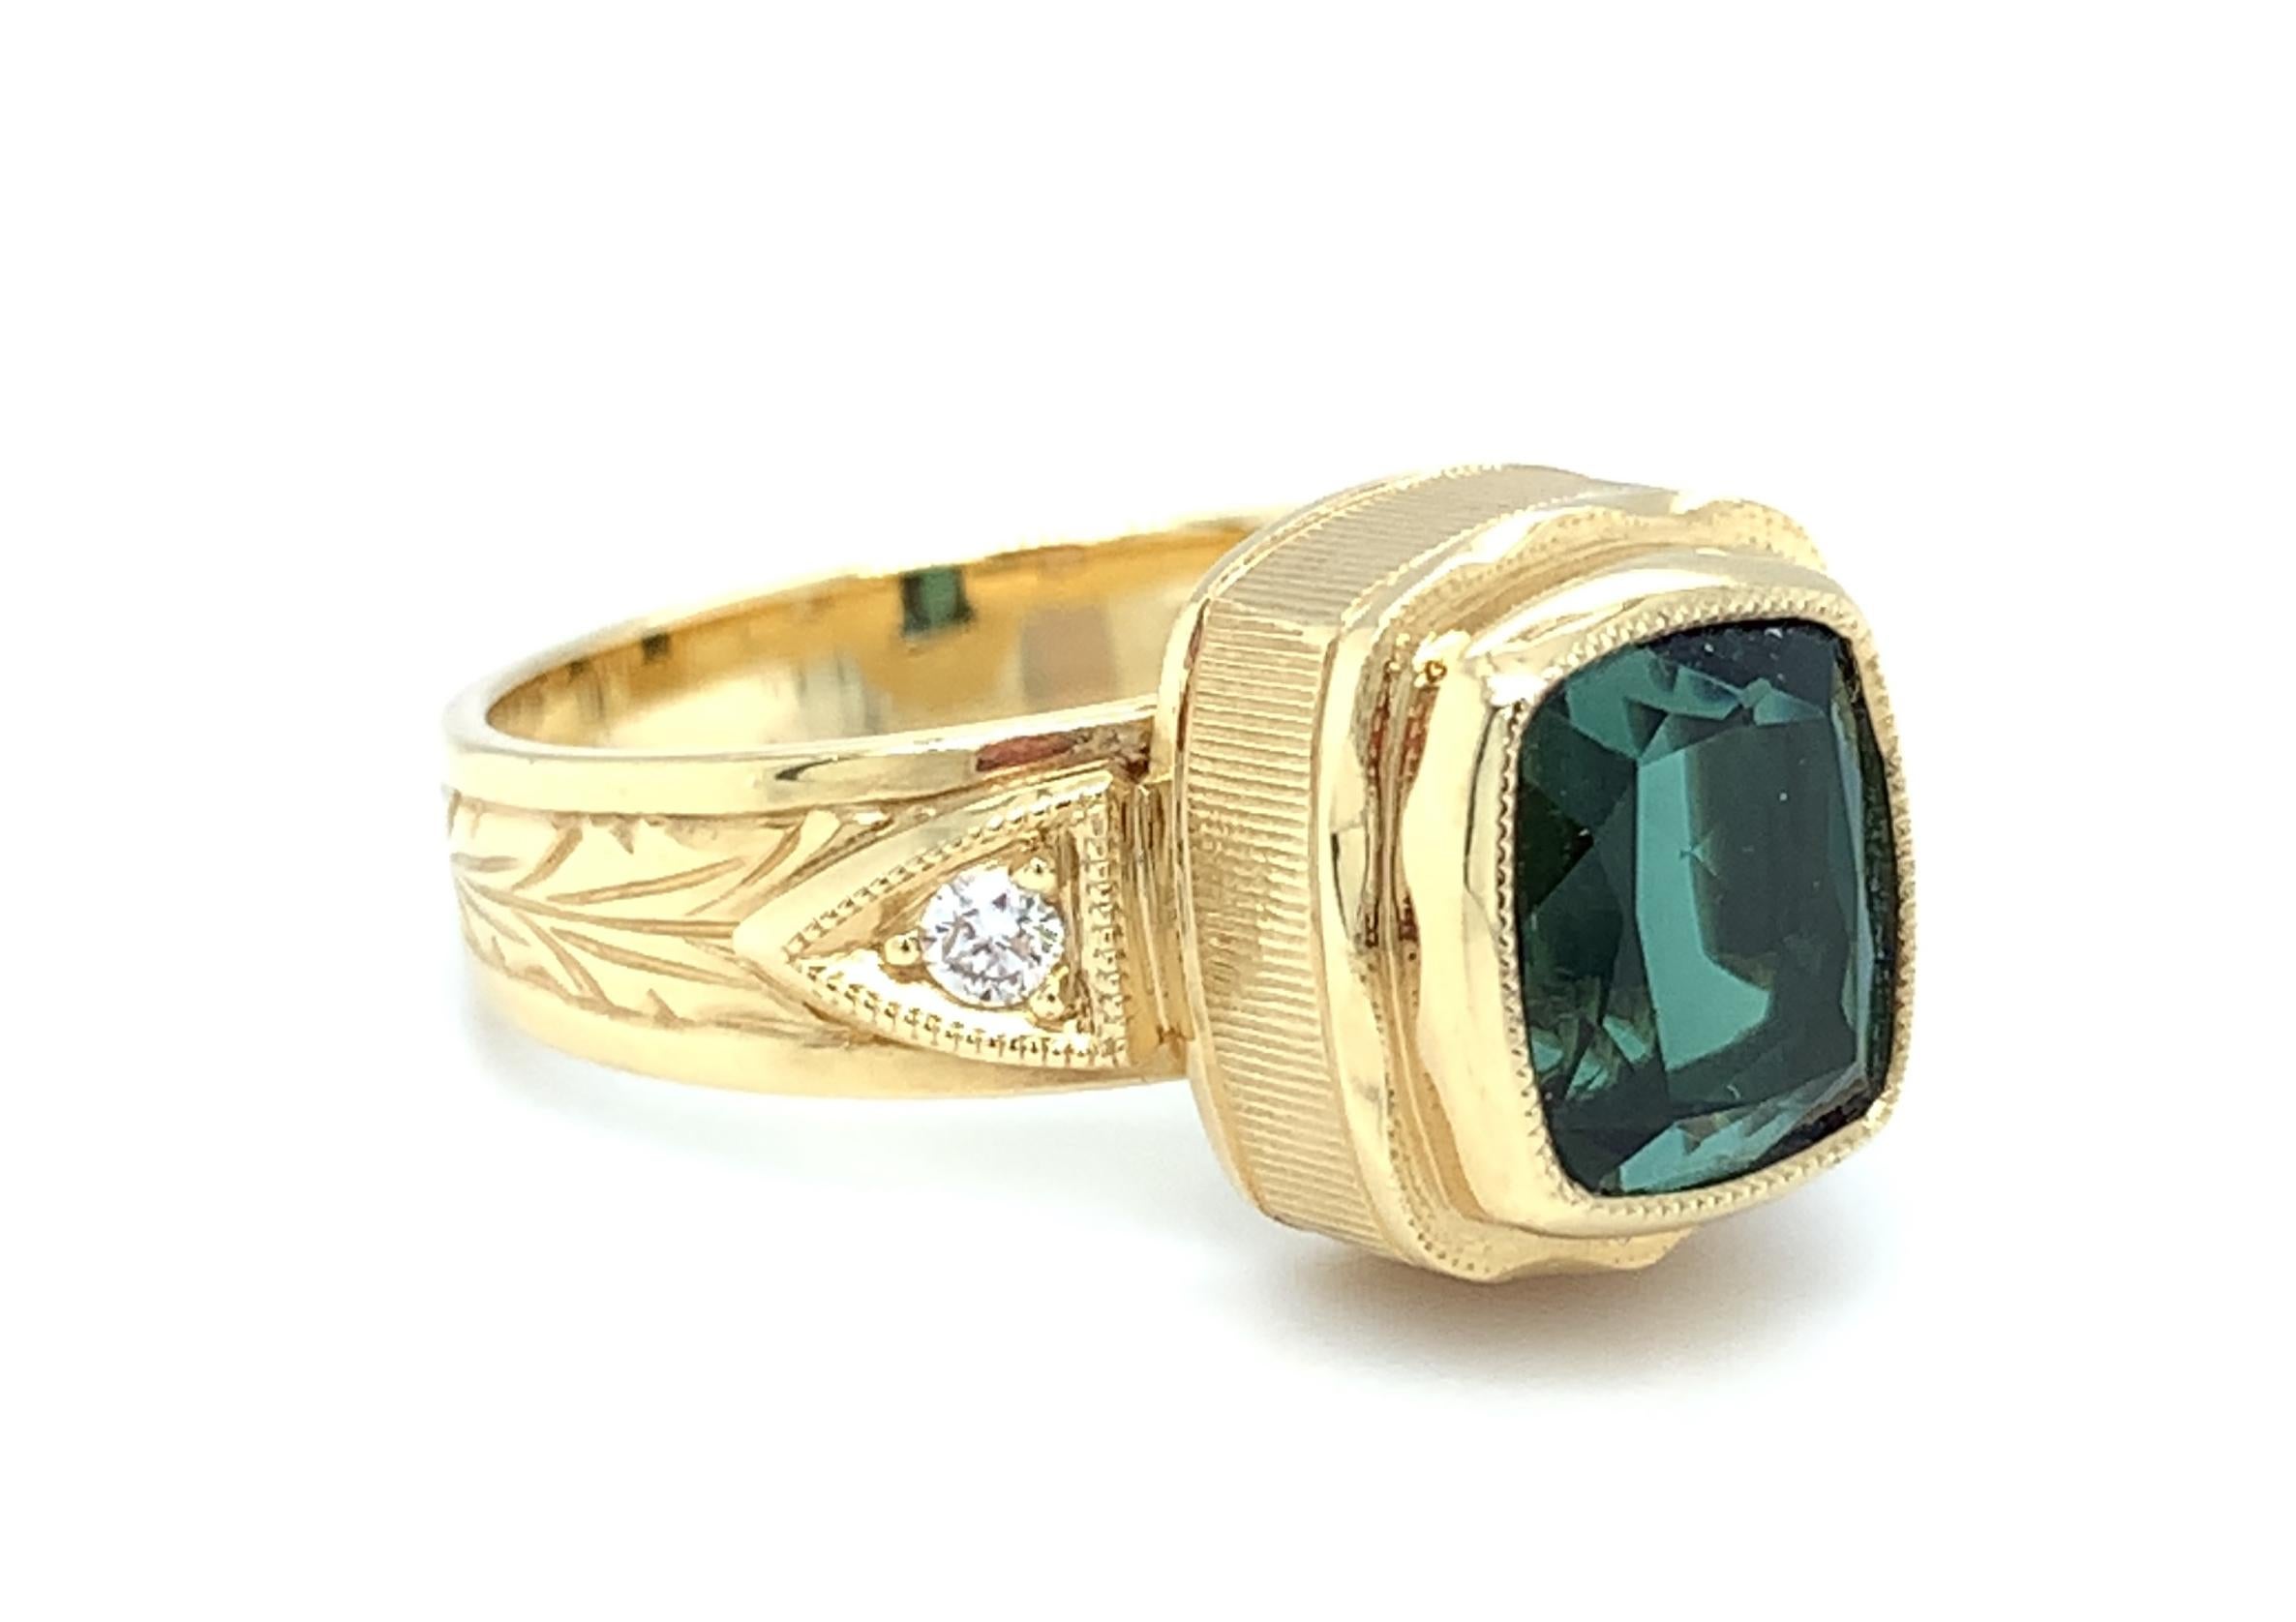 A lively, 2.48 carat cushion cut blue-green tourmaline is featured in one of our most popular signature ring designs. The center stone has been beautifully bezel set, with intricate details added around the entire bezel and along the tailored band.